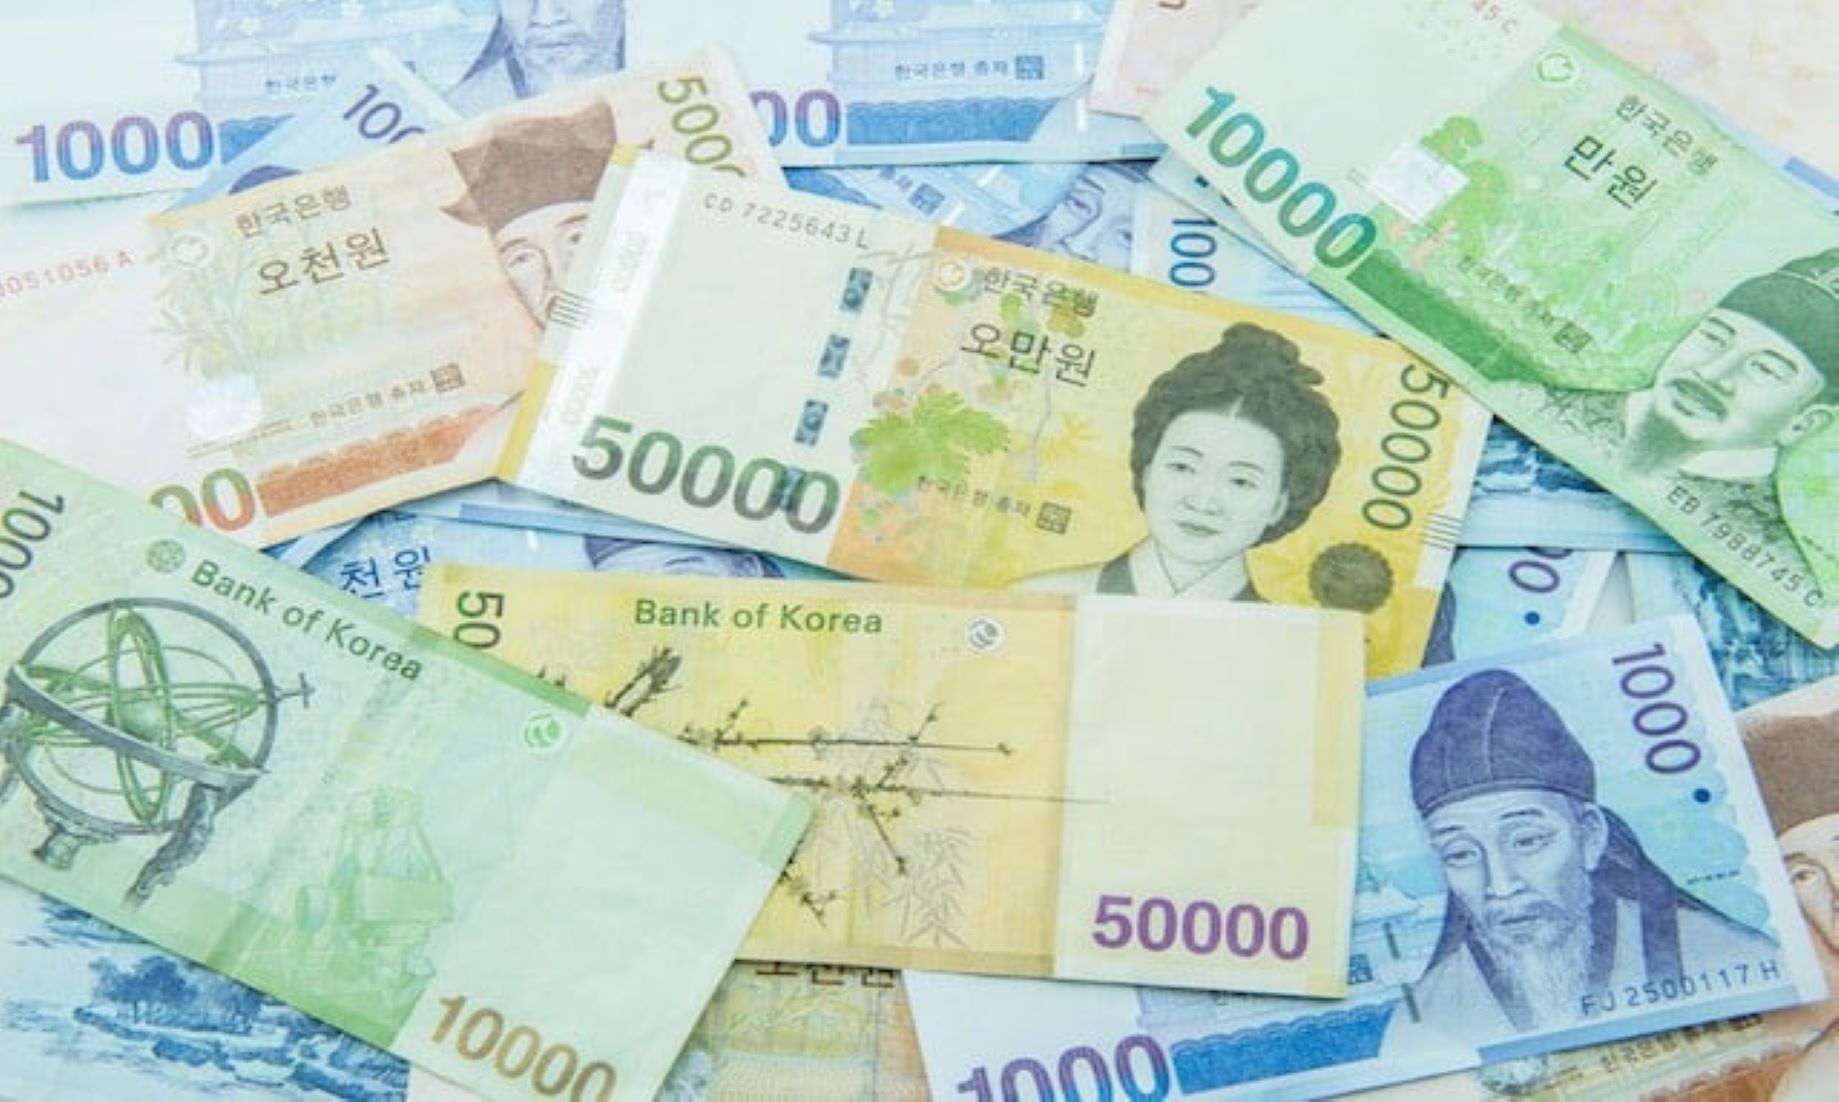 S. Korea Supplied 3.4 Billion USD Banknotes Ahead Of Lunar New Year’s Holiday